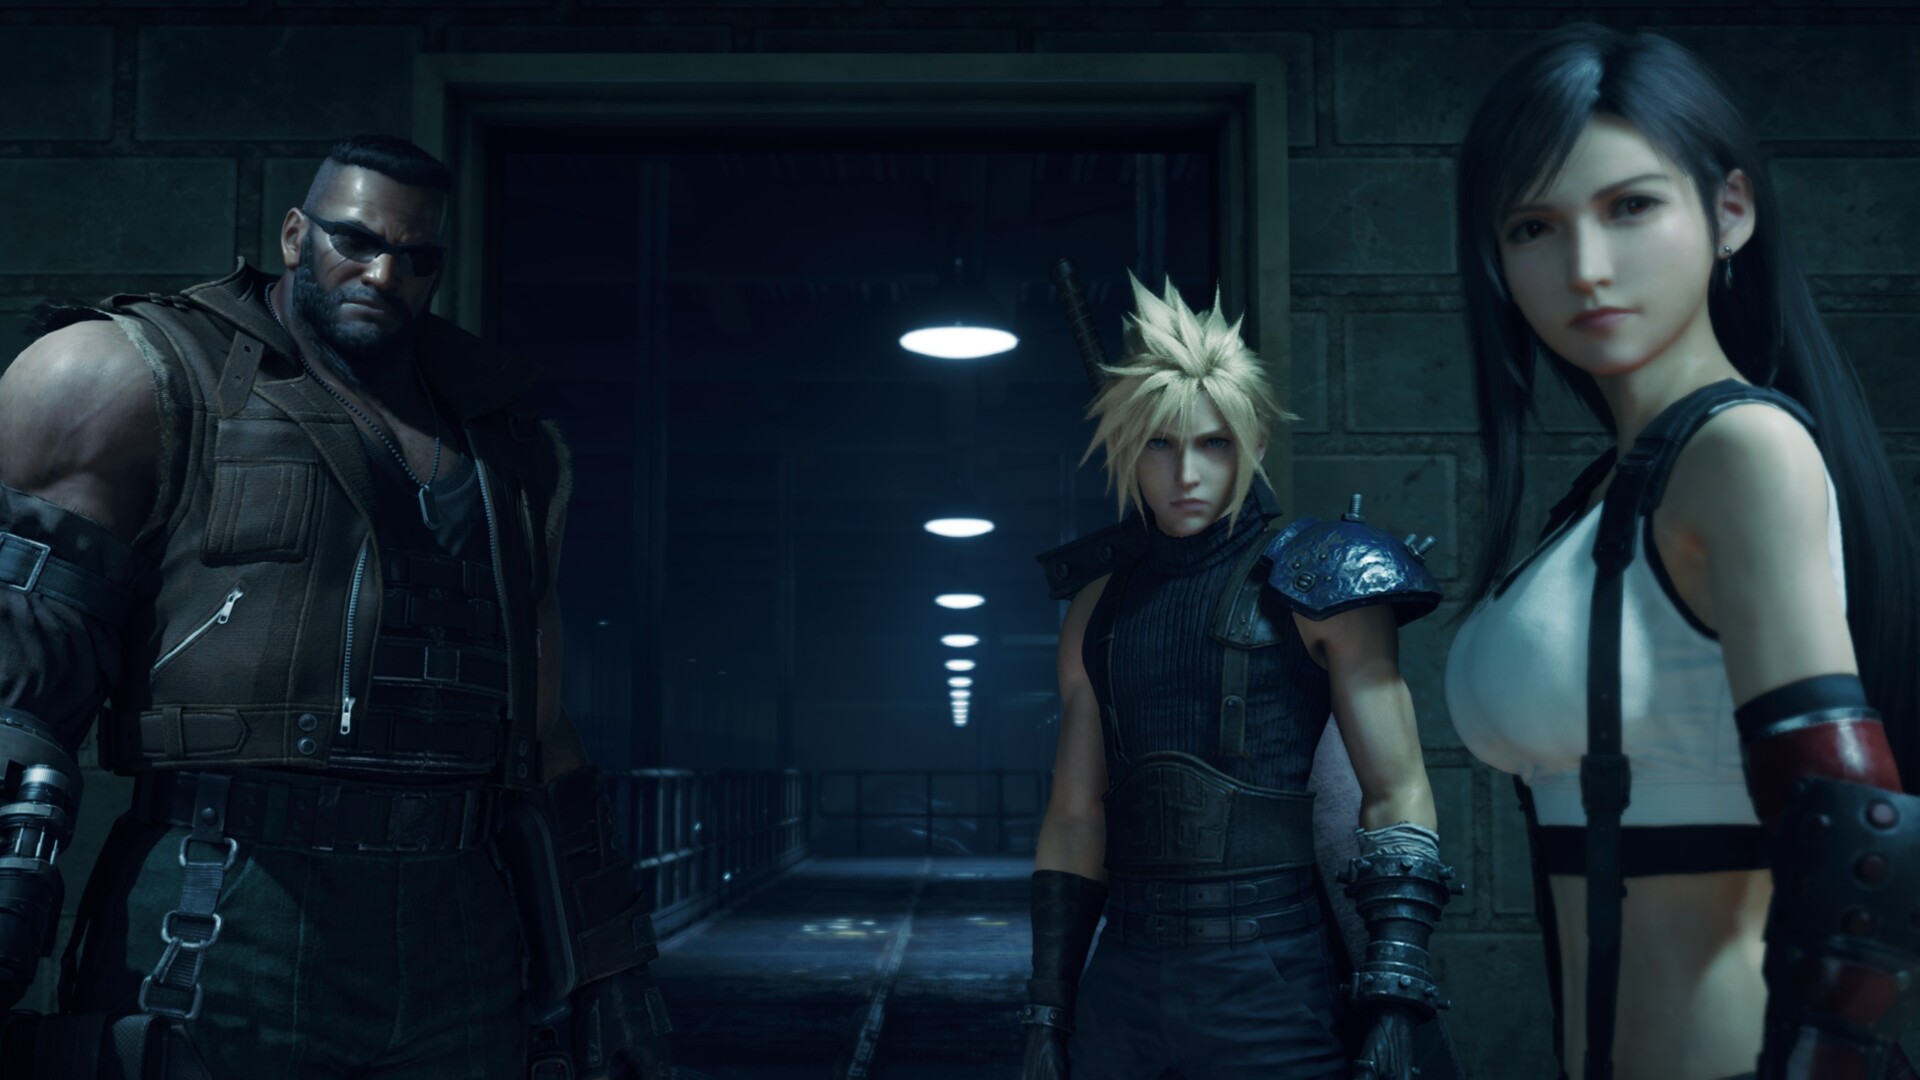 Final Fantasy Vii Remake Intergrade Launches For Steam Tomorrow [updated]